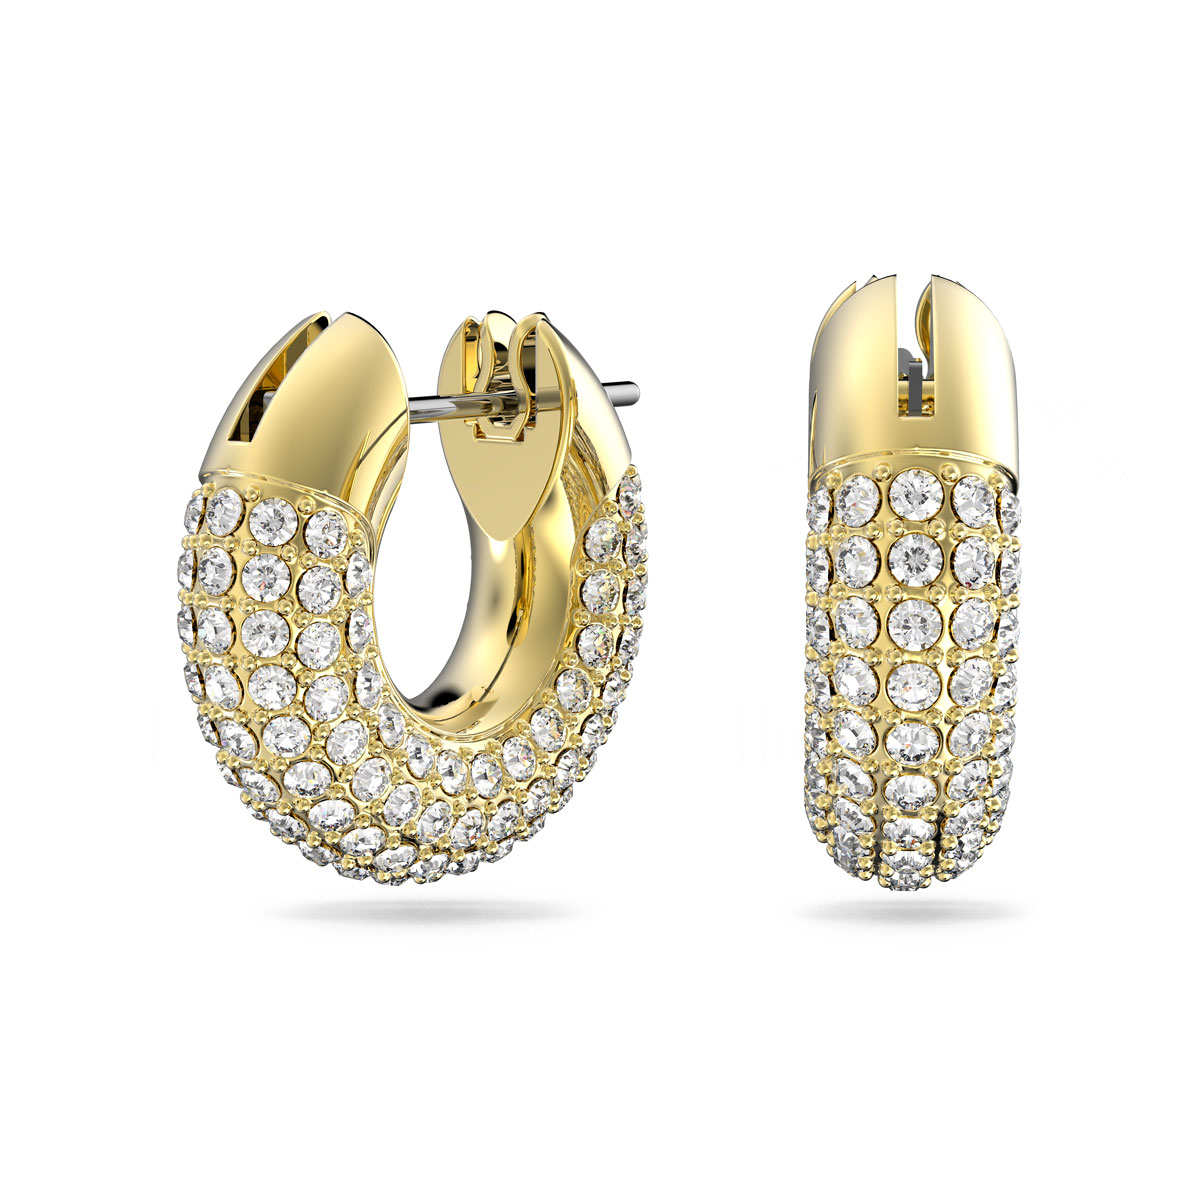 Swarovski Pave Crystal and Gold-Tone Plated Dextera Hoop Pierced Earrings